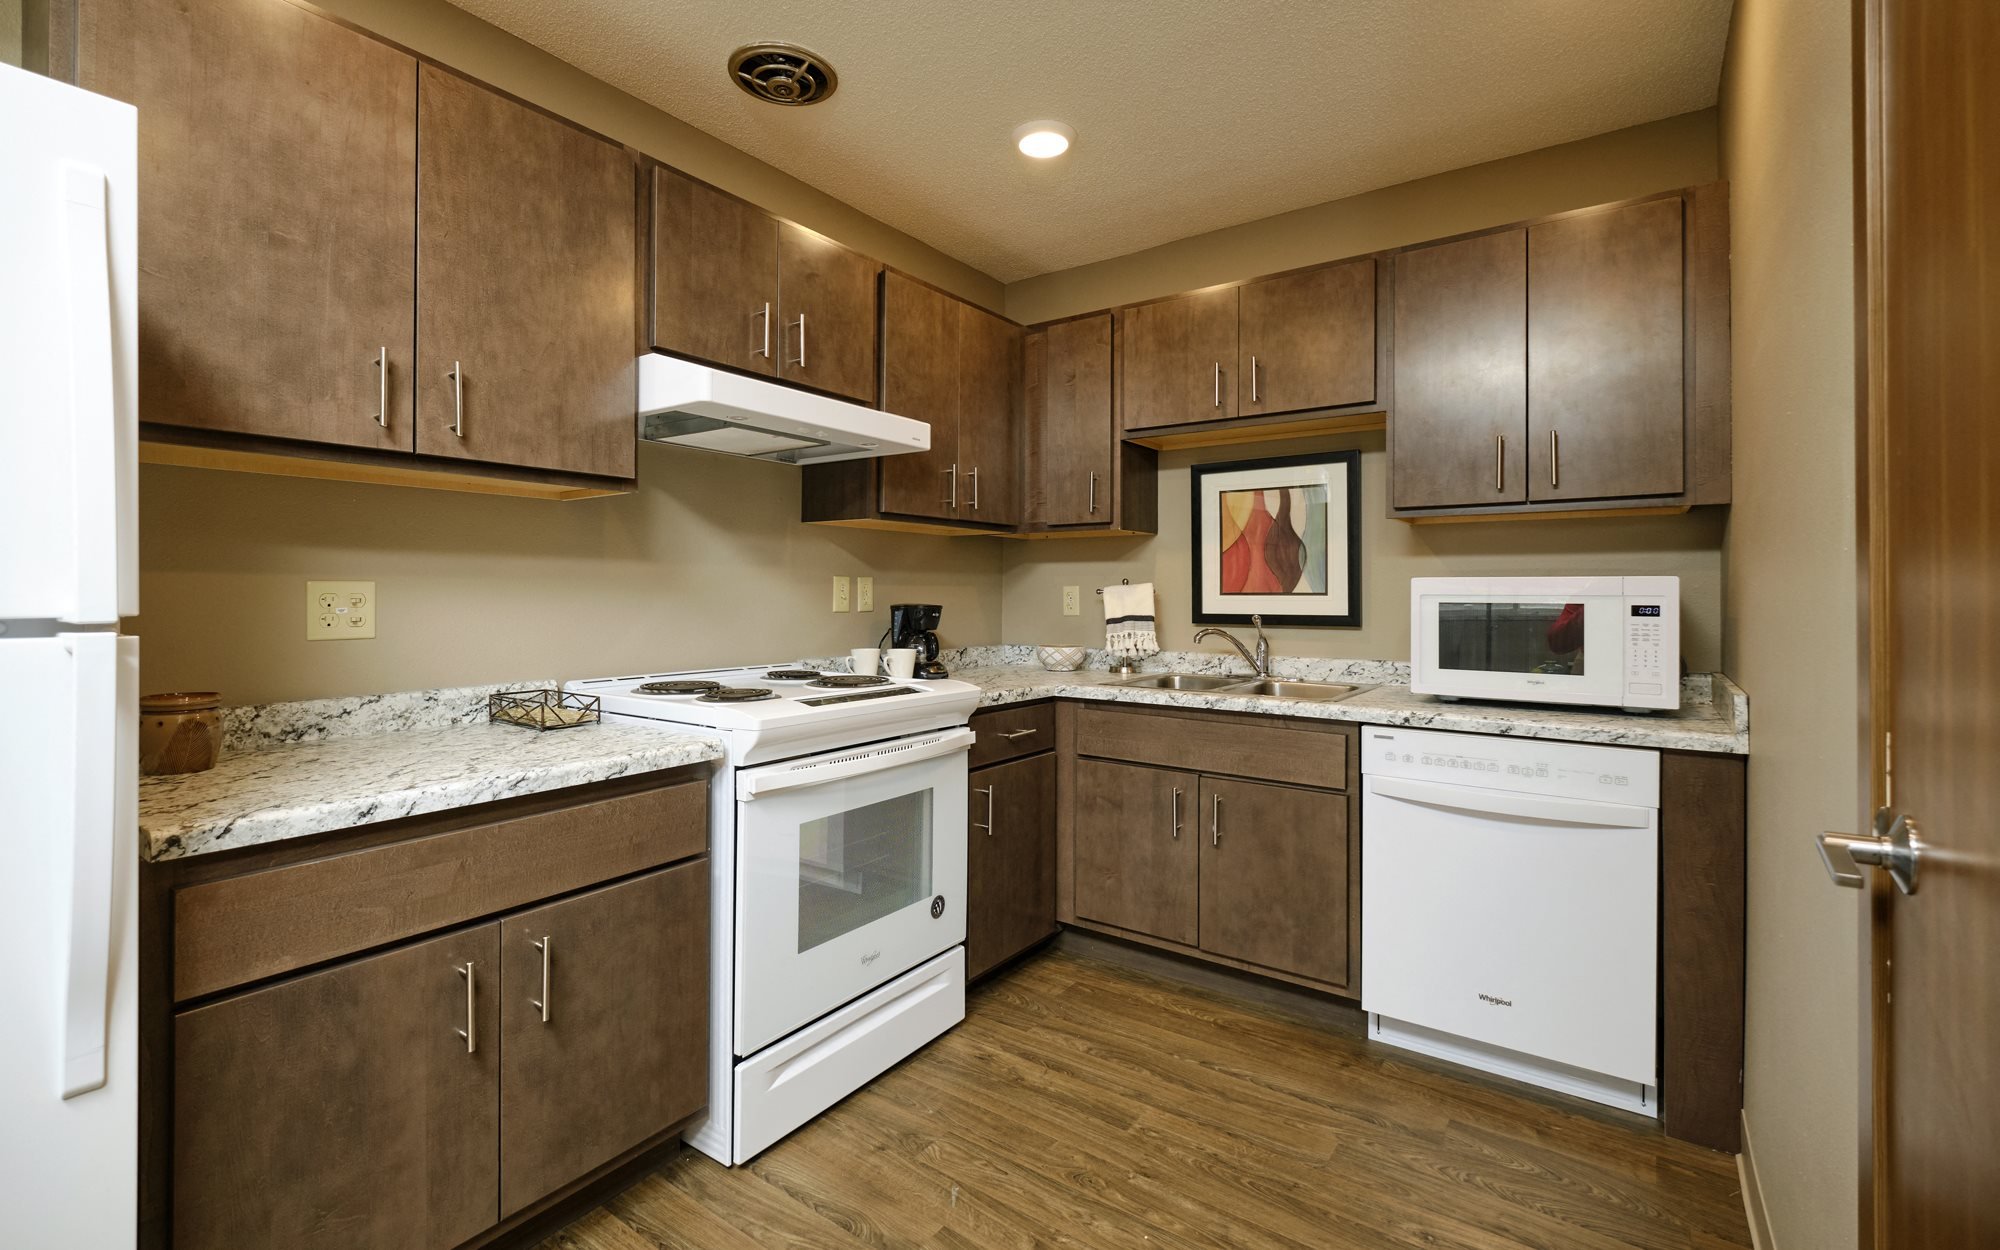 A kitchen in Sunset Apartments shows all appliances including microwave and dishwasher are included.